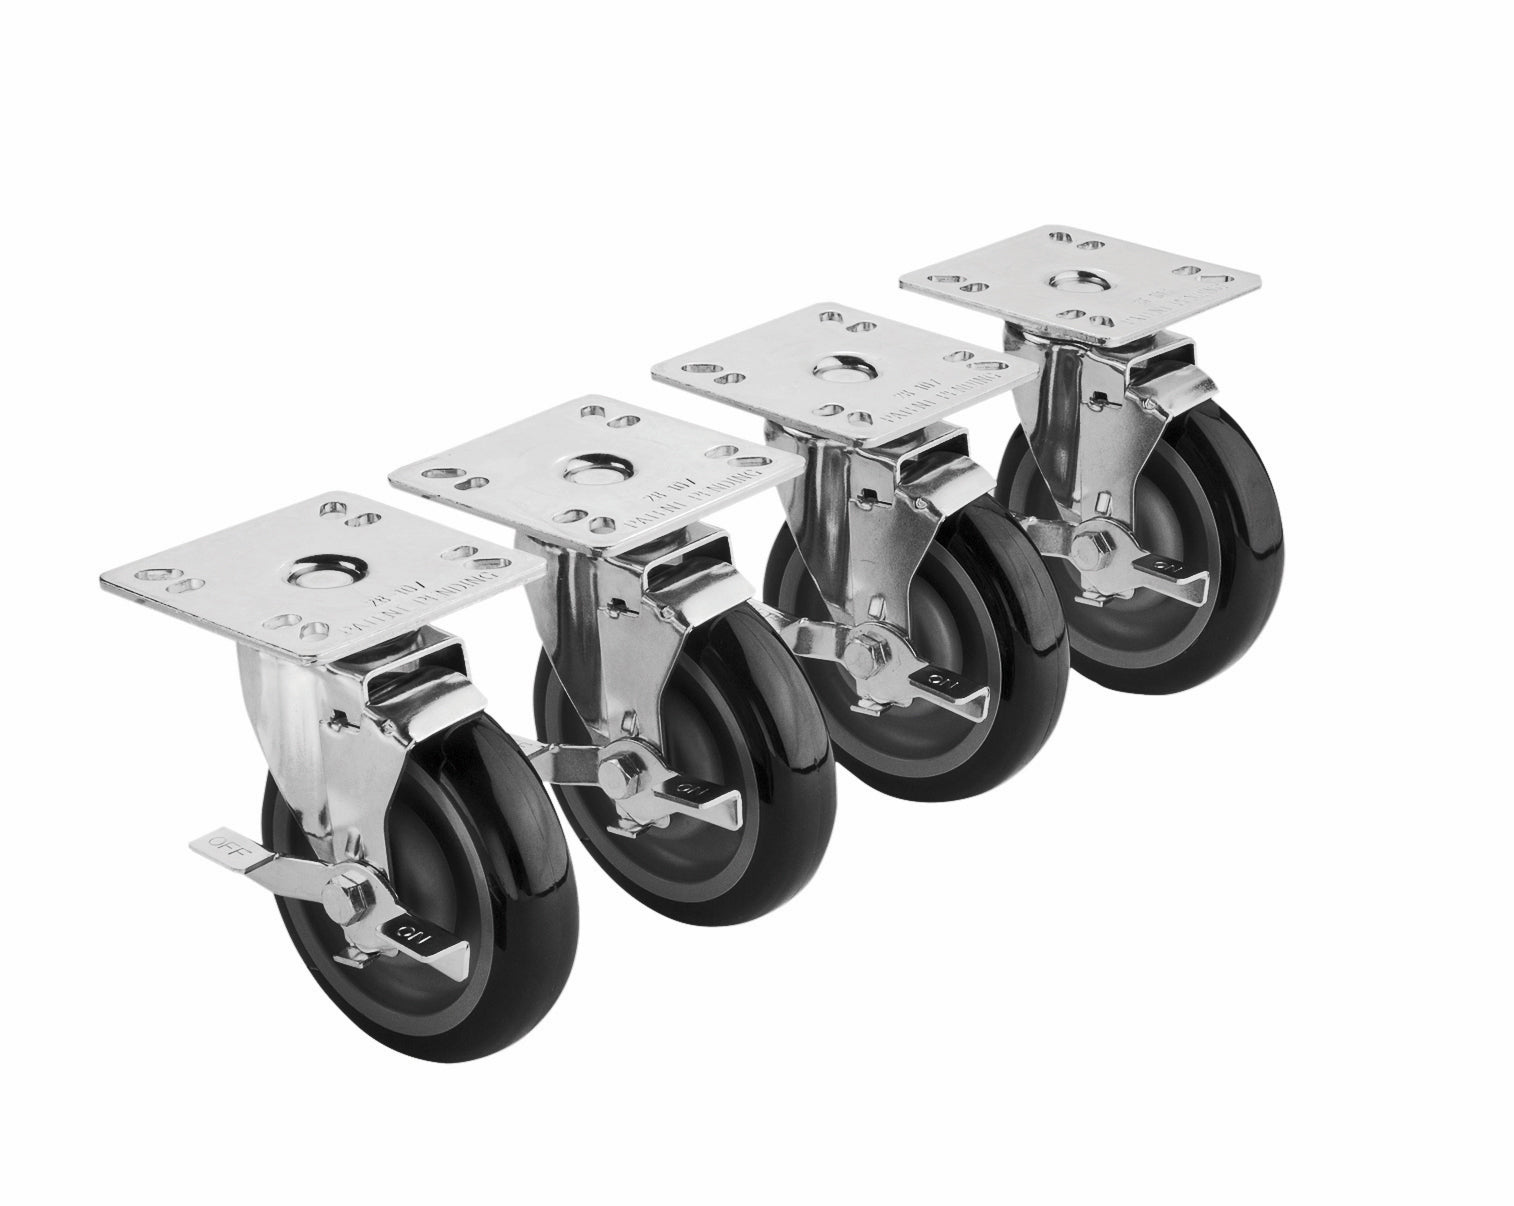 Krowne 28-111S SET OF 28-111 3 1/2" x 3 1/2" PLATE CASTERS WITH 5" LOCKING WHEELS - 4 PIECES PER SET                